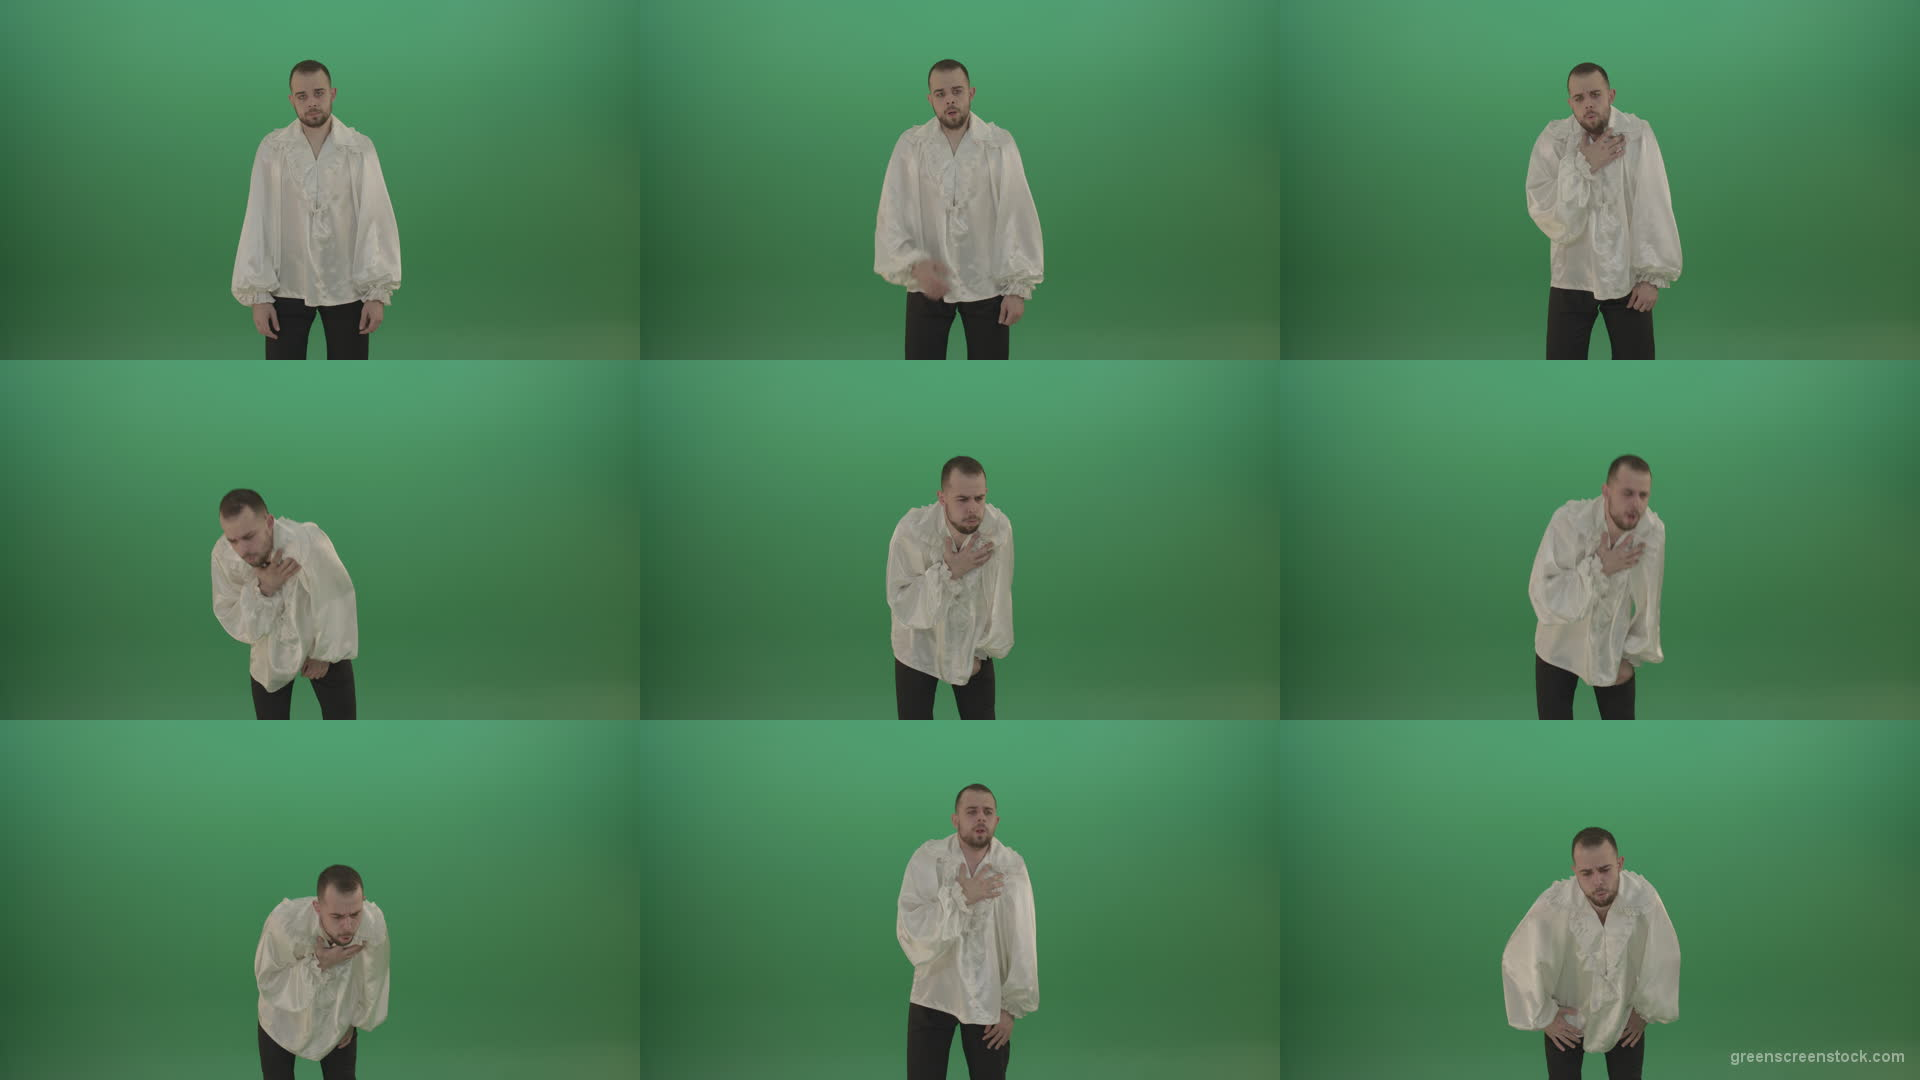 Man-is-very-coughing-infected-with-a-virus-isolated-on-chromakey-background Green Screen Stock